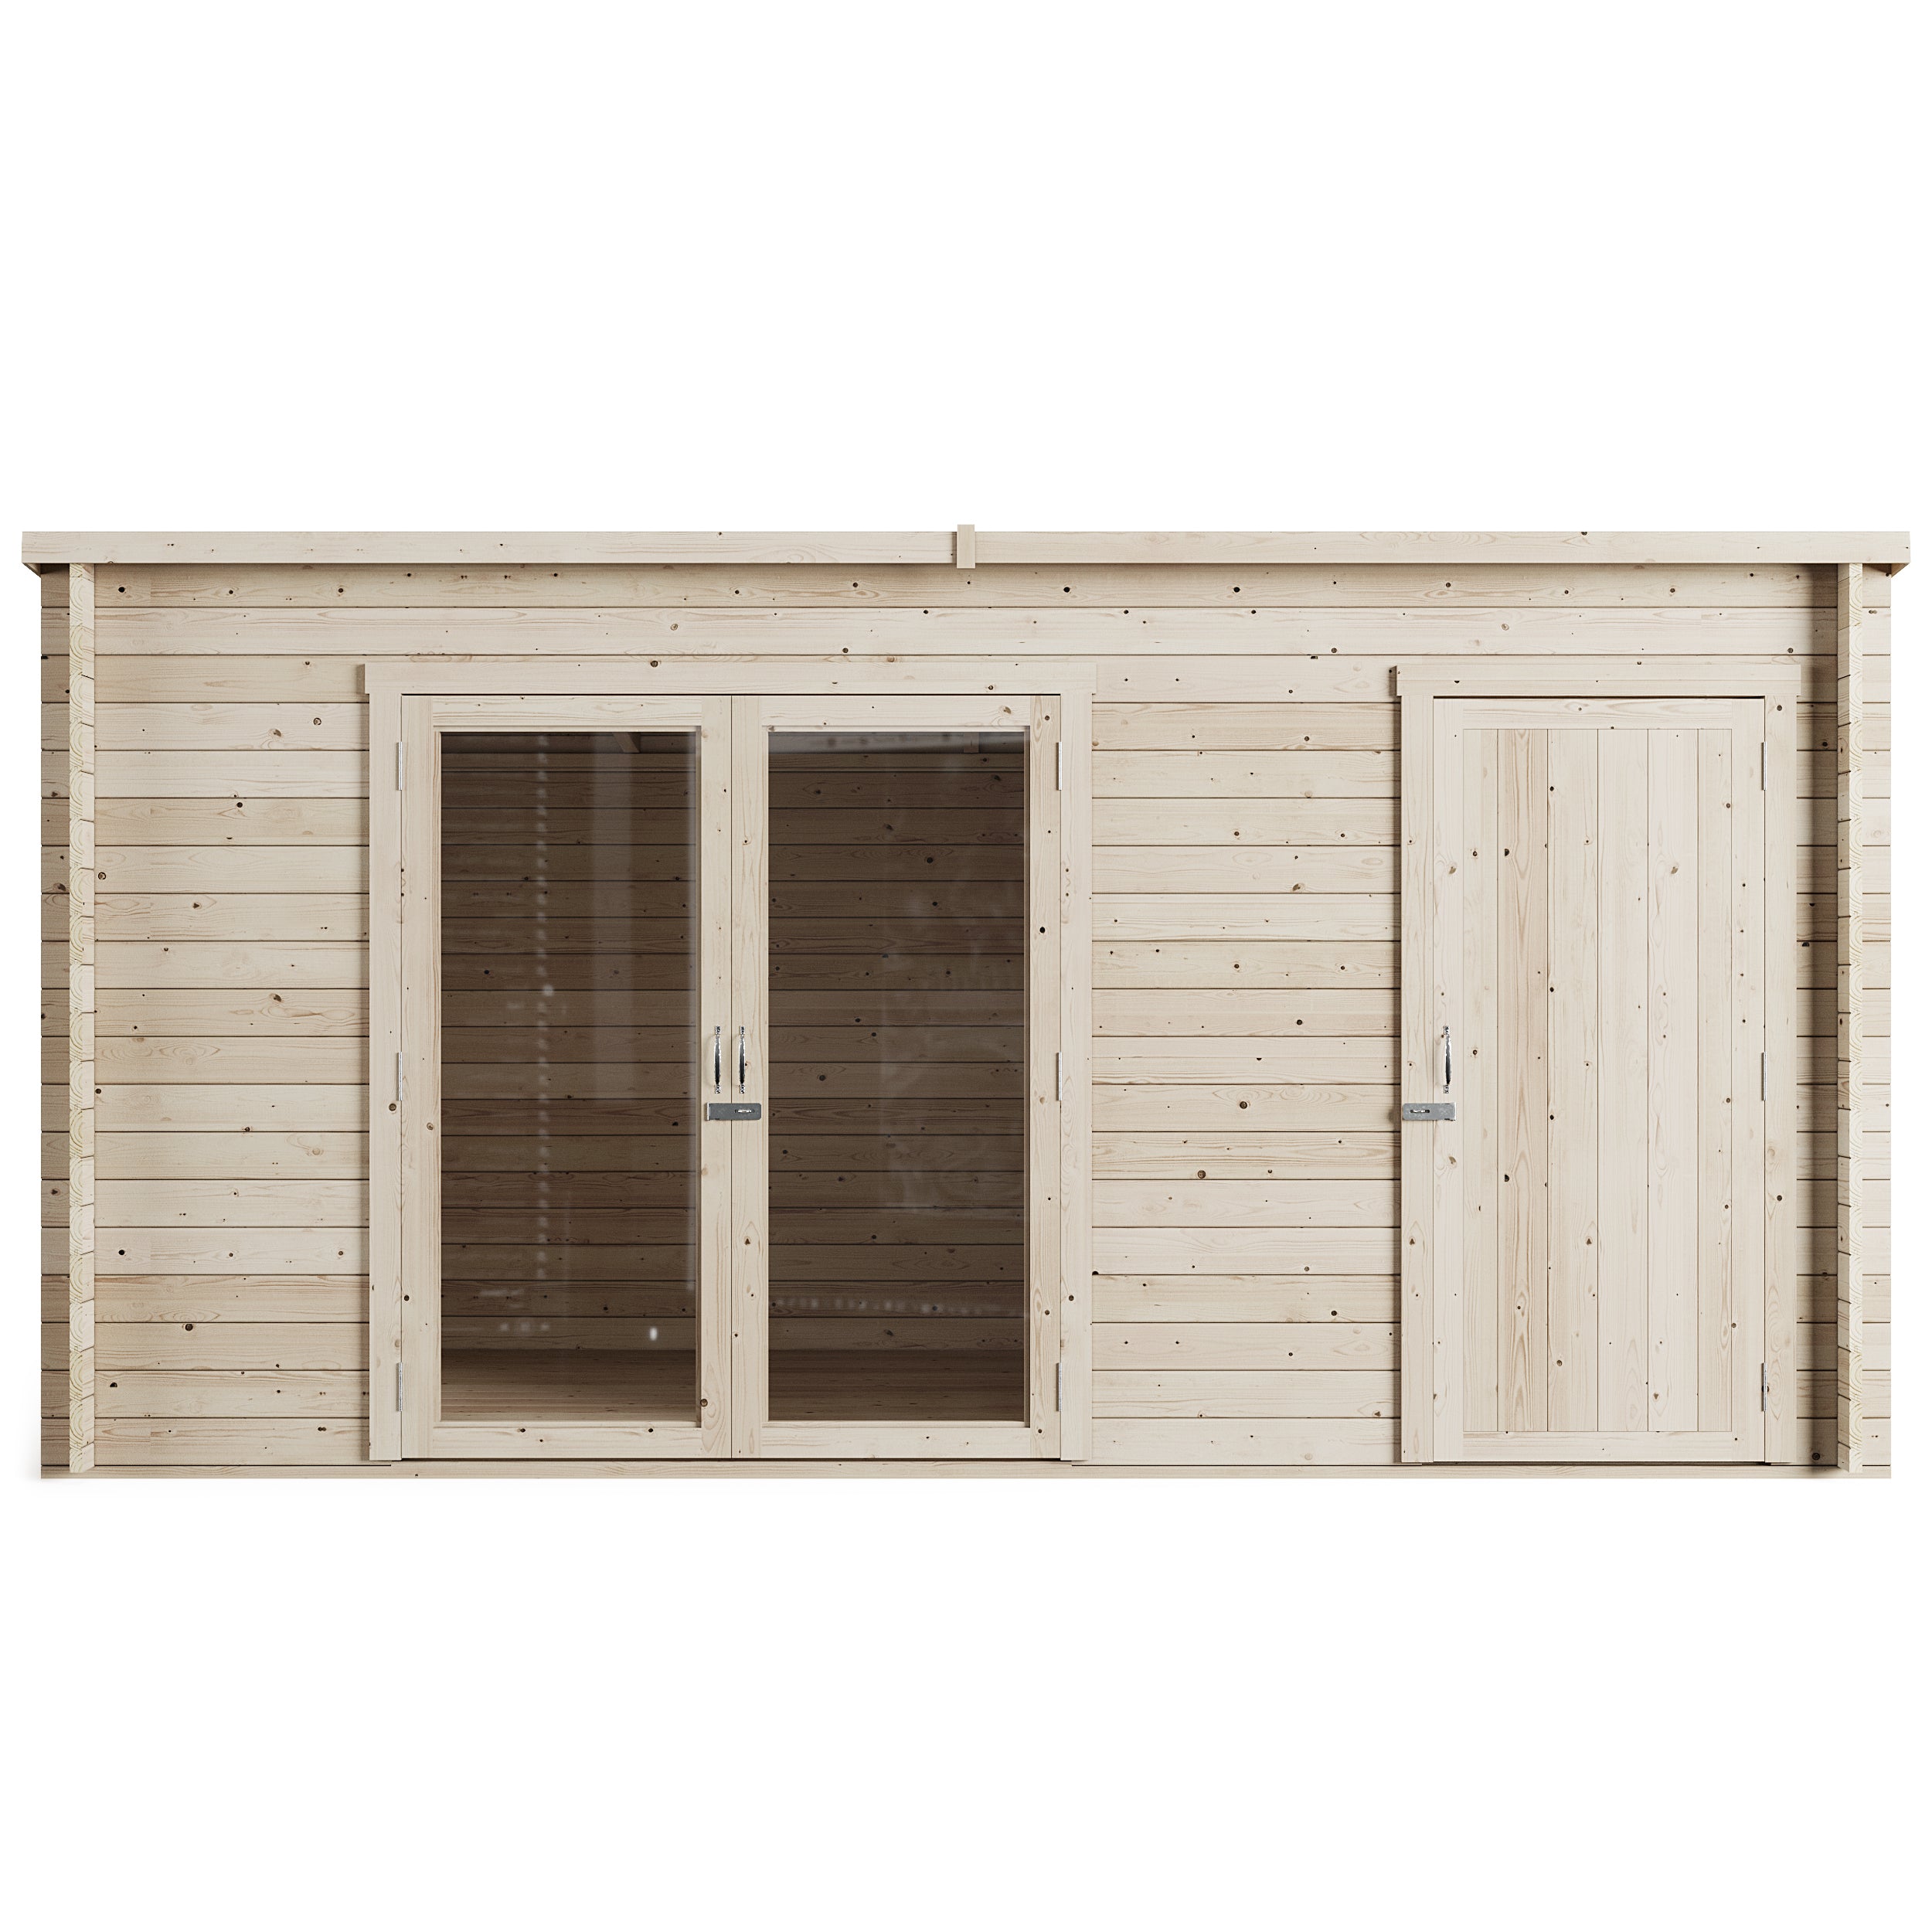 Store More Darton Pent Log Cabin Summerhouse with Side Store - Pressure Treated -14ft x 8ft